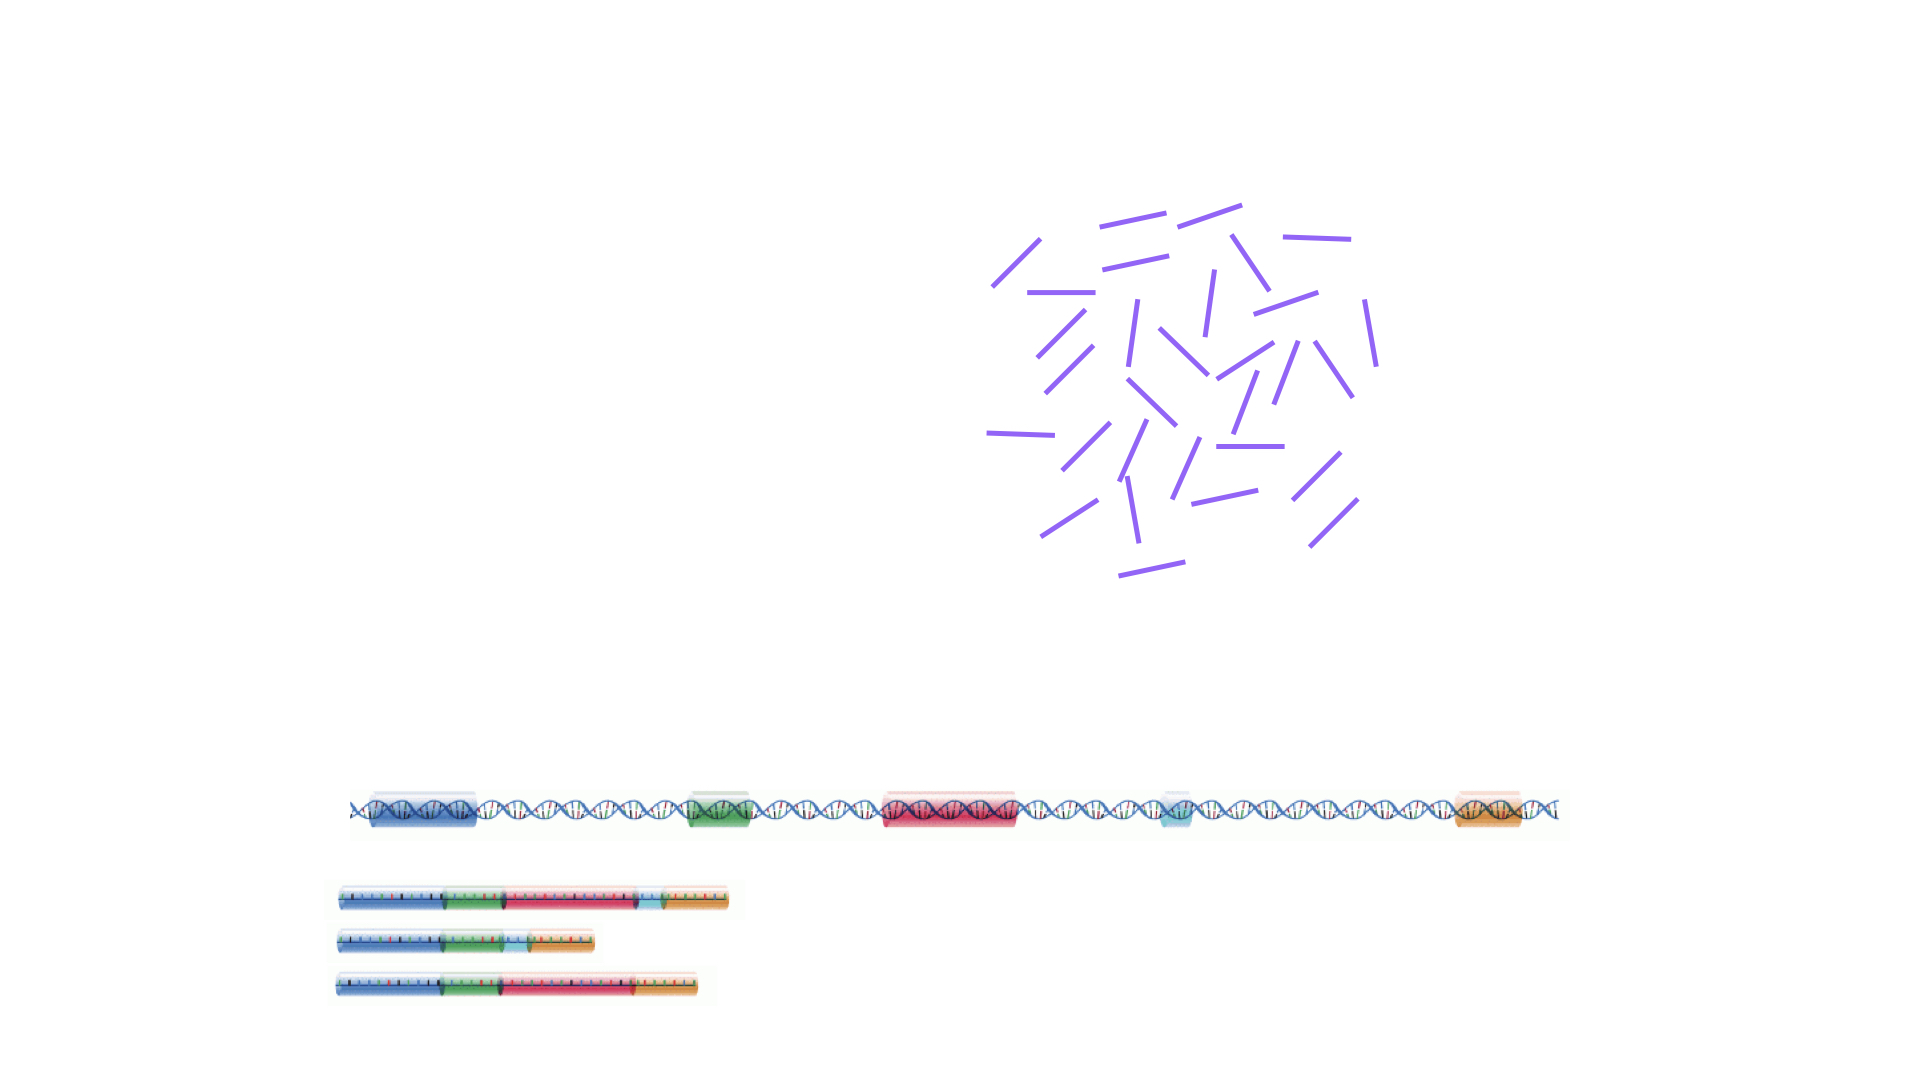 Illustration of a set of reads generated by a sequencer, and genomic and transcriptomic reference sequences